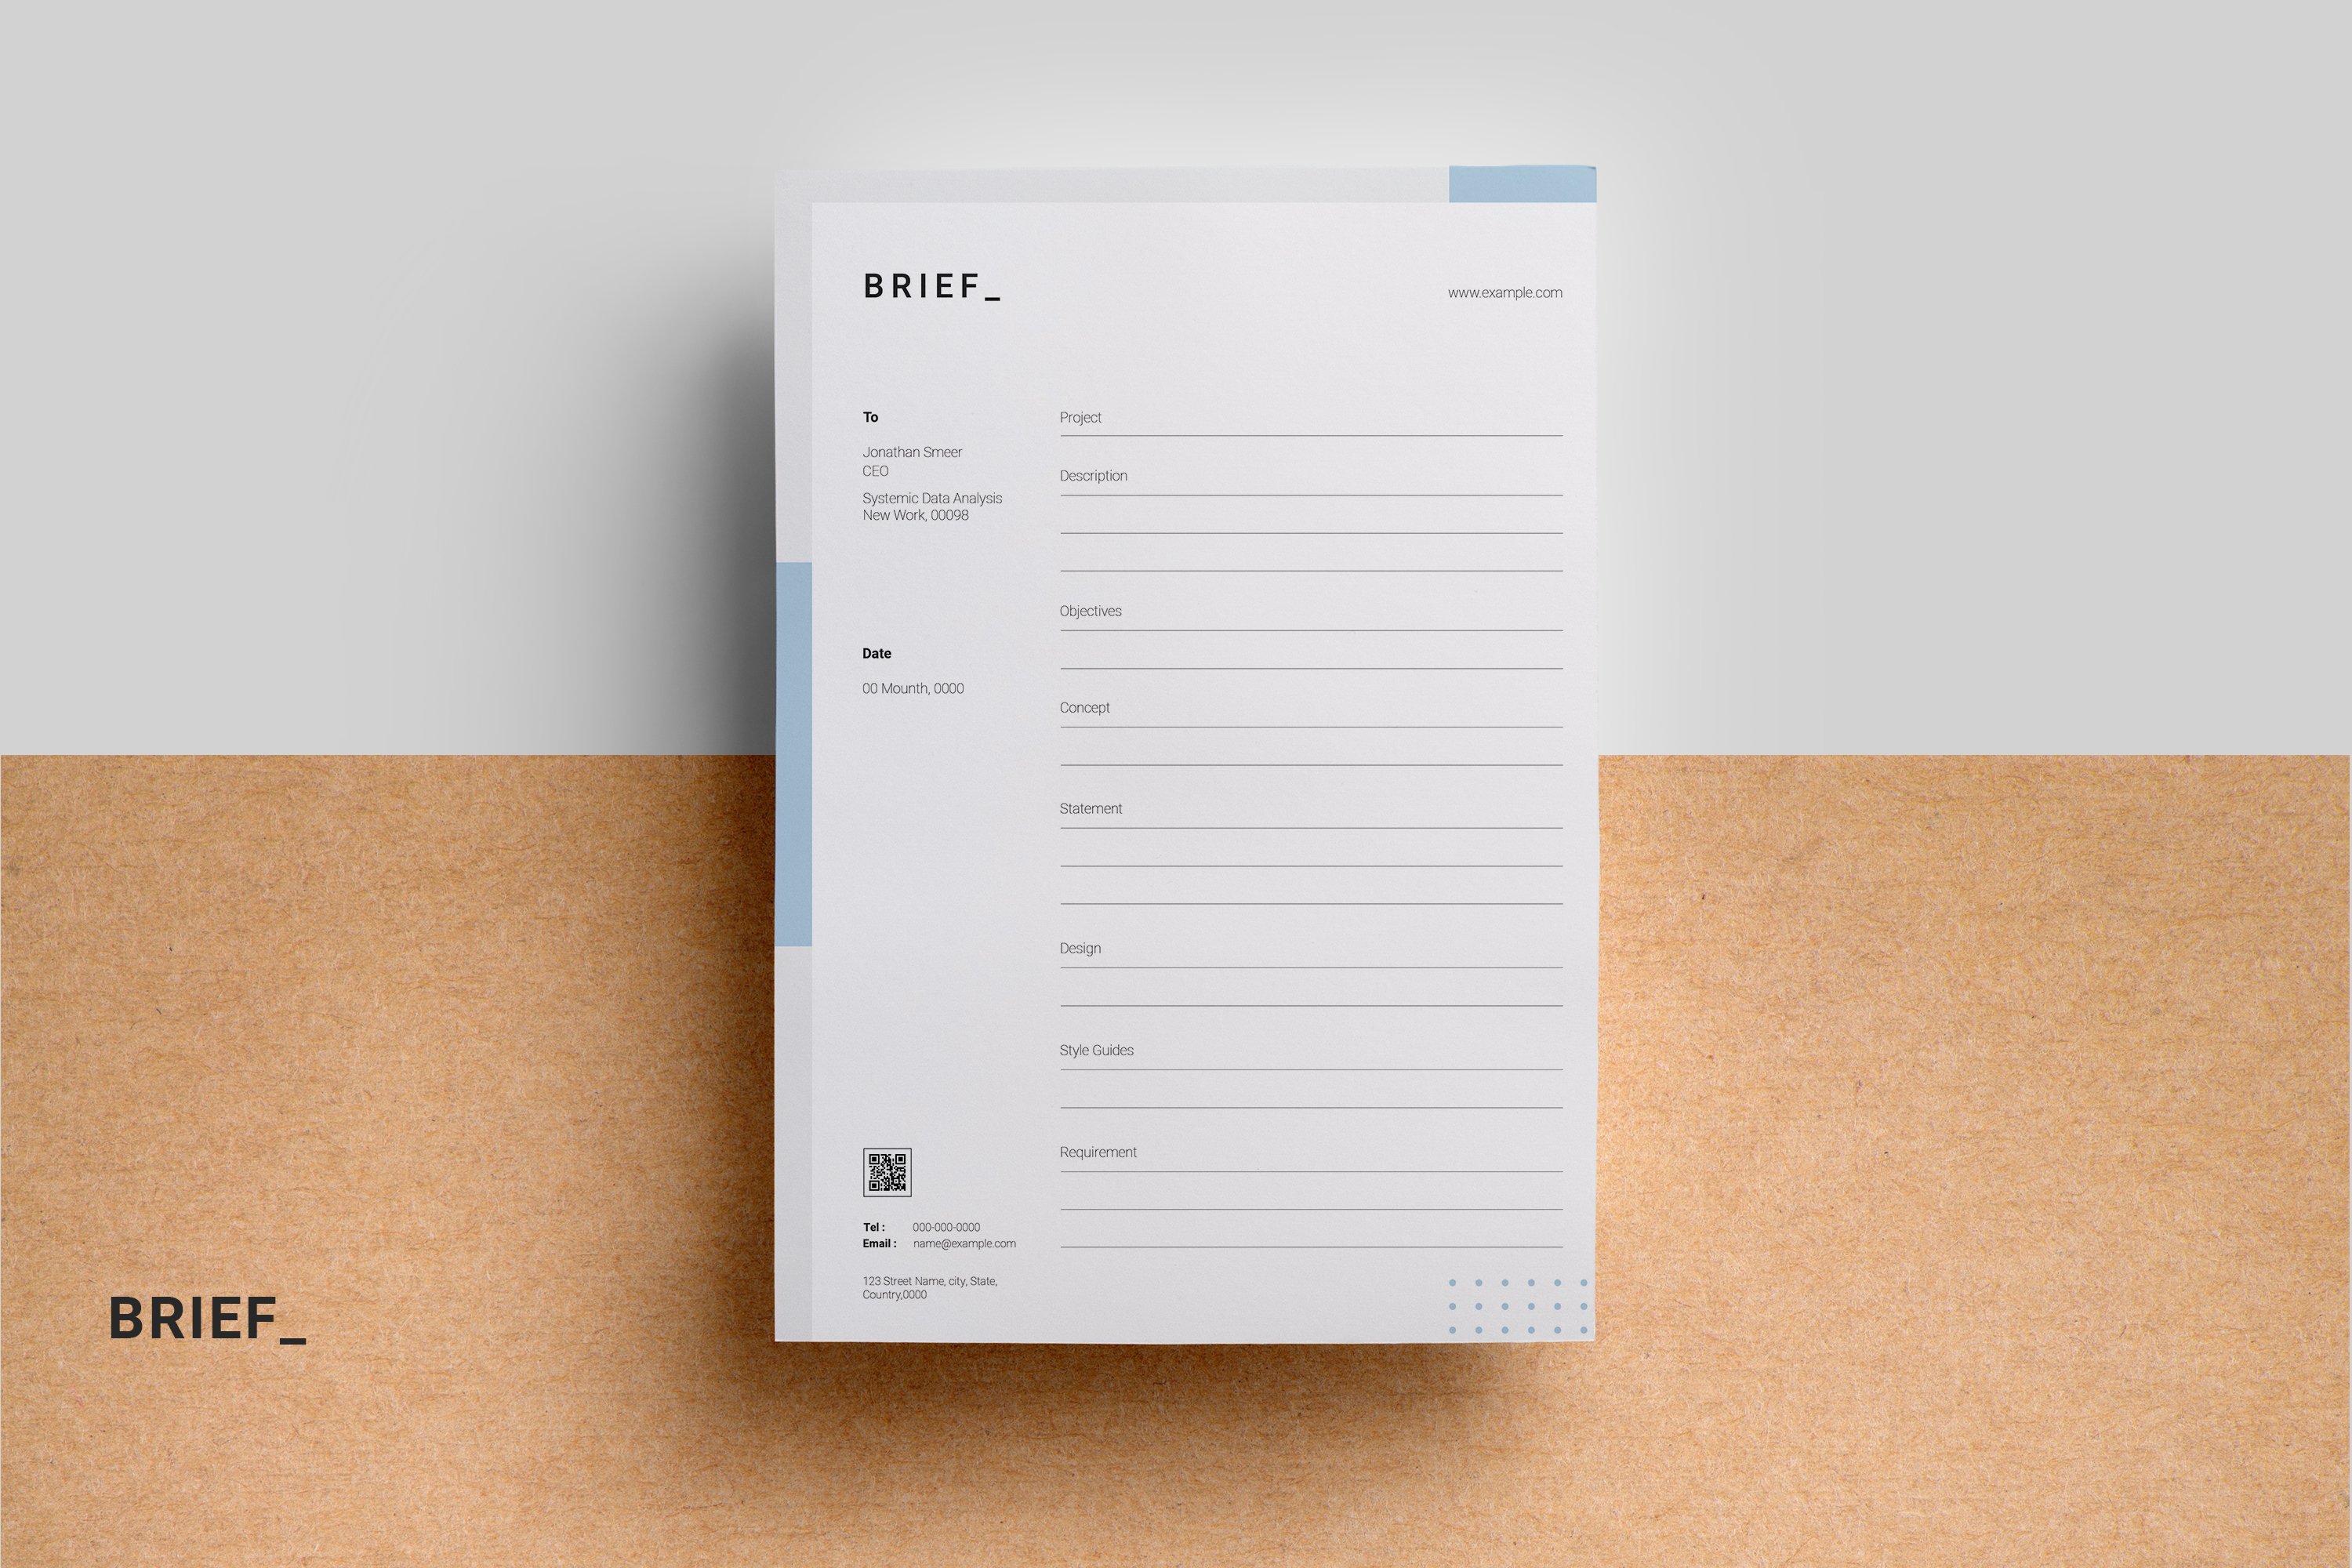 Proposal Document Templates vol-02 preview image.